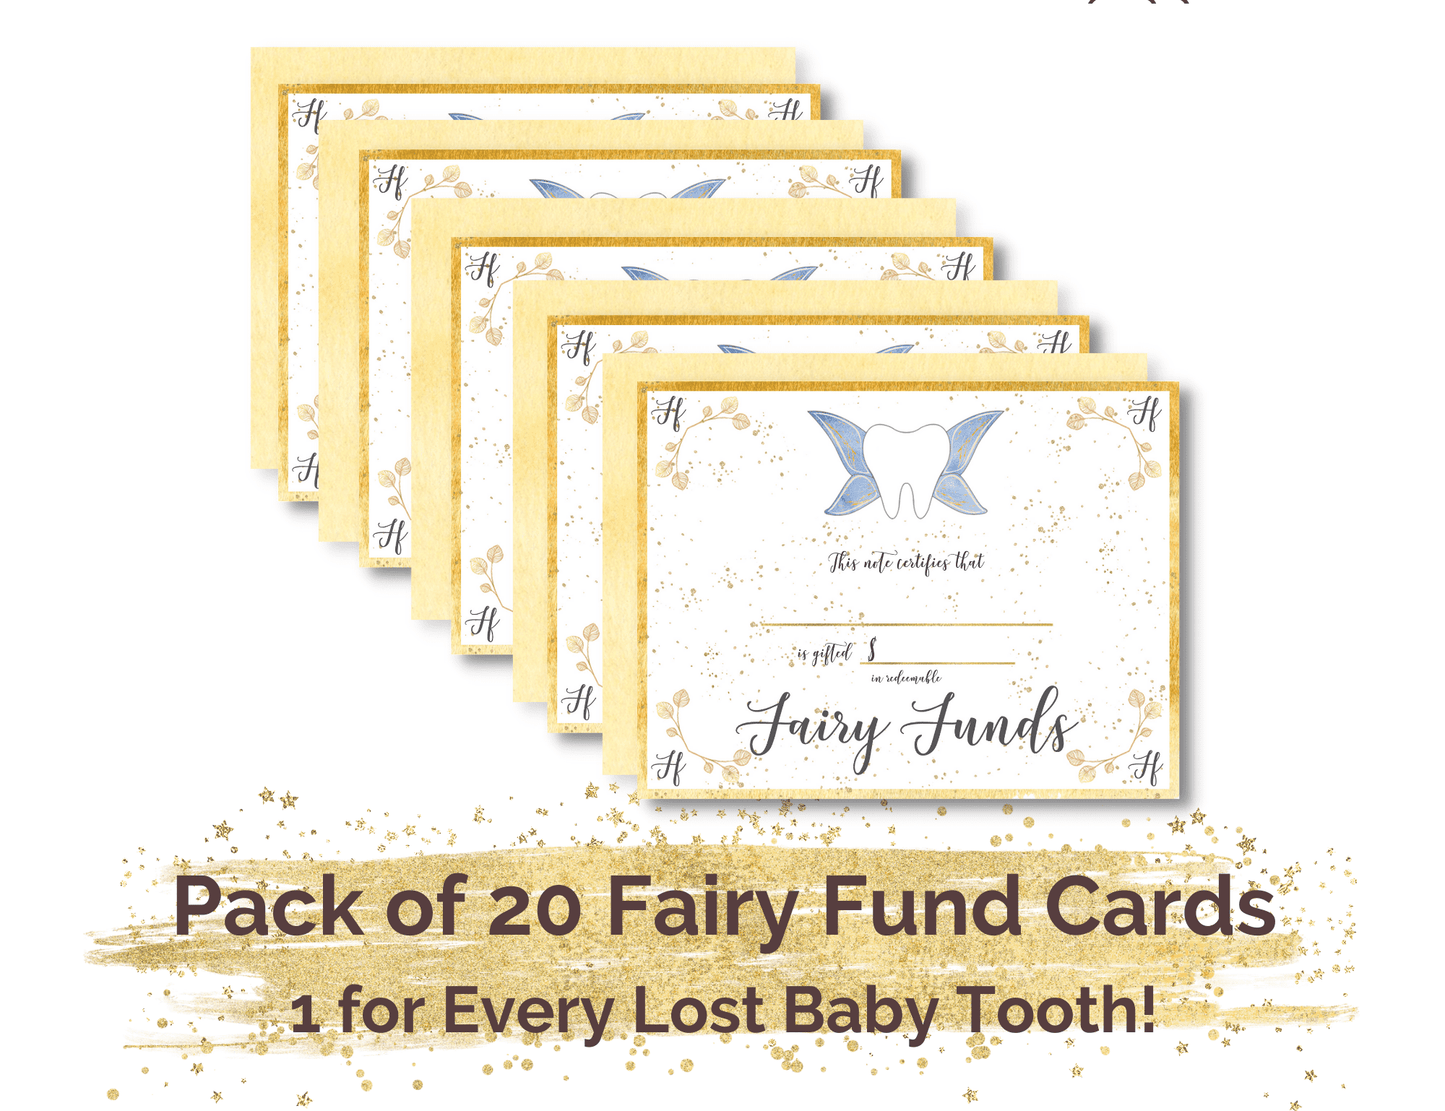 Customizable Tooth Fairy Certificates, a Cash Alternative, pack of 20